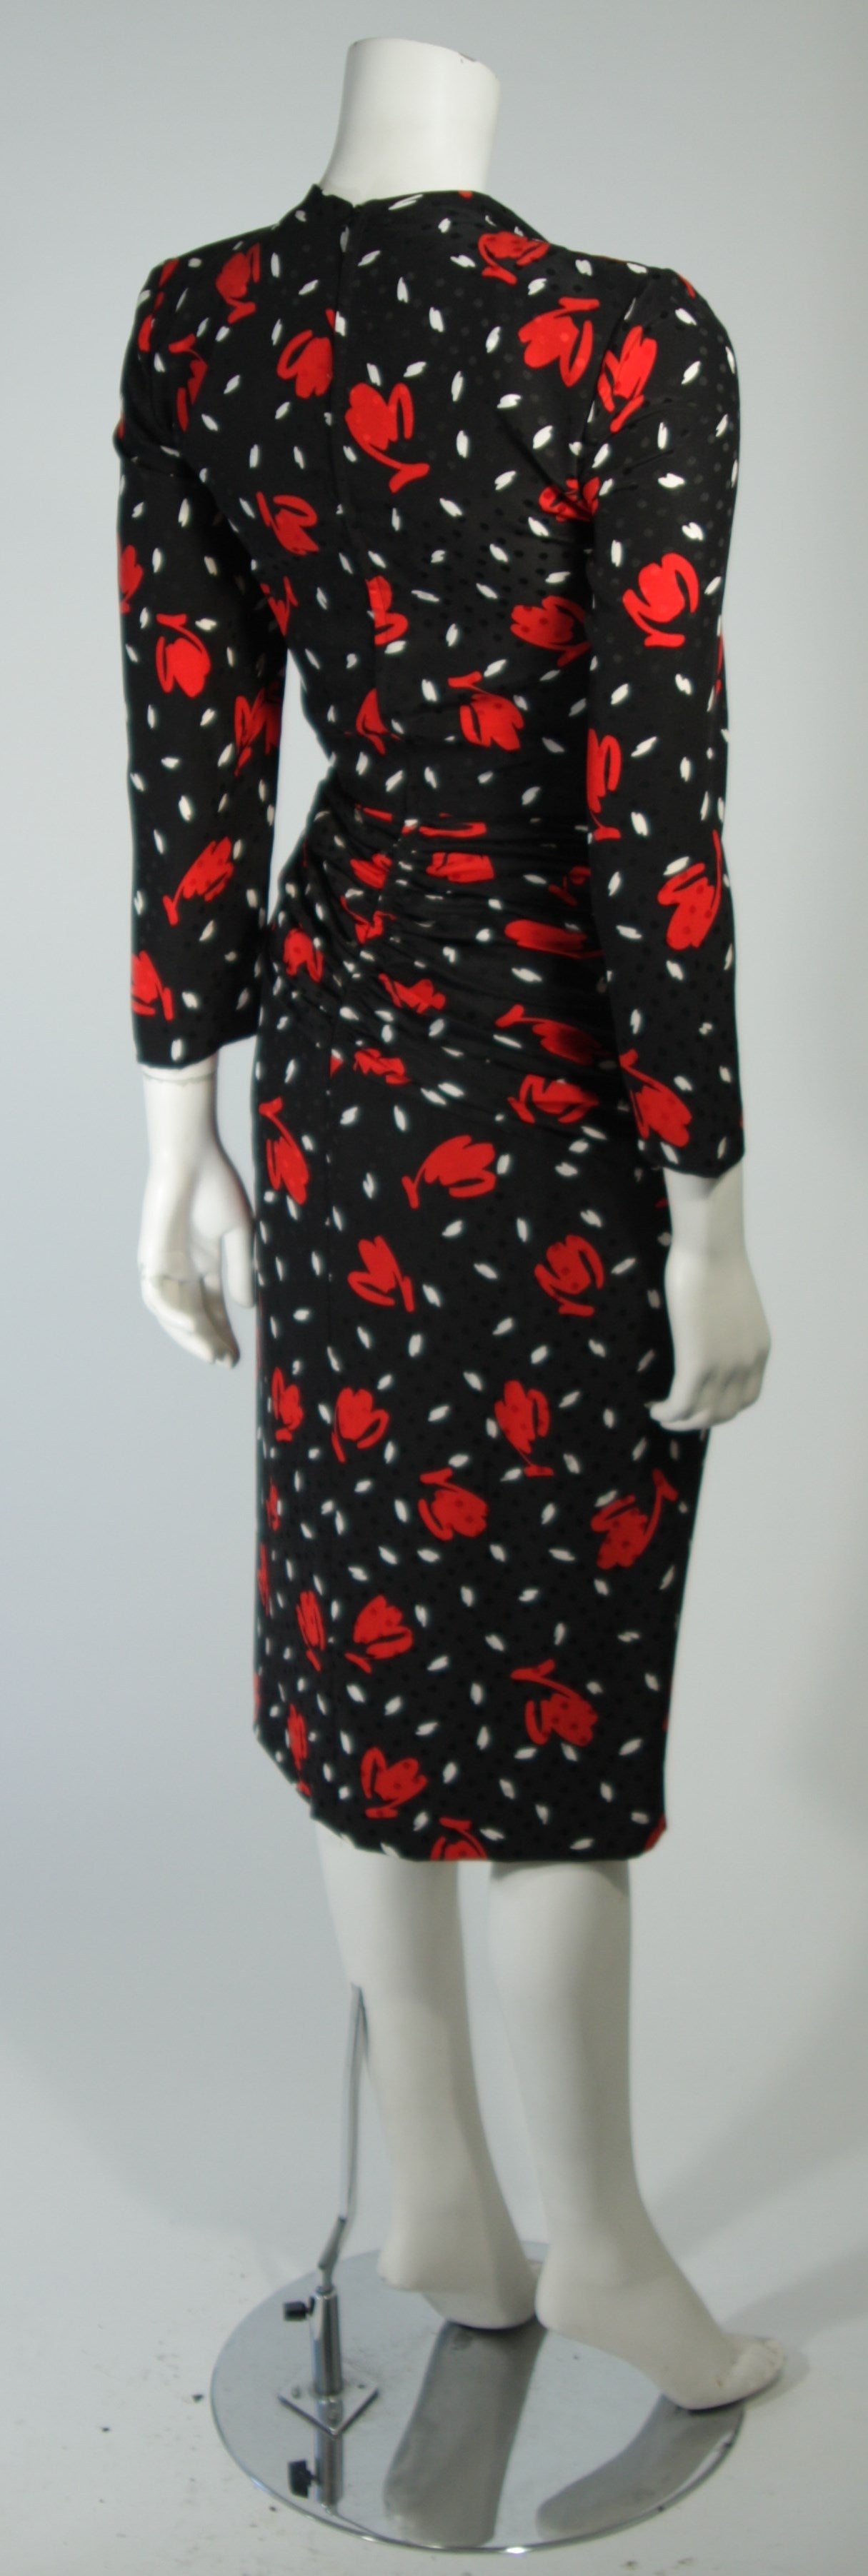 Vintage Black and White Polka Dot Dress with Abstract Rose Size Small 2